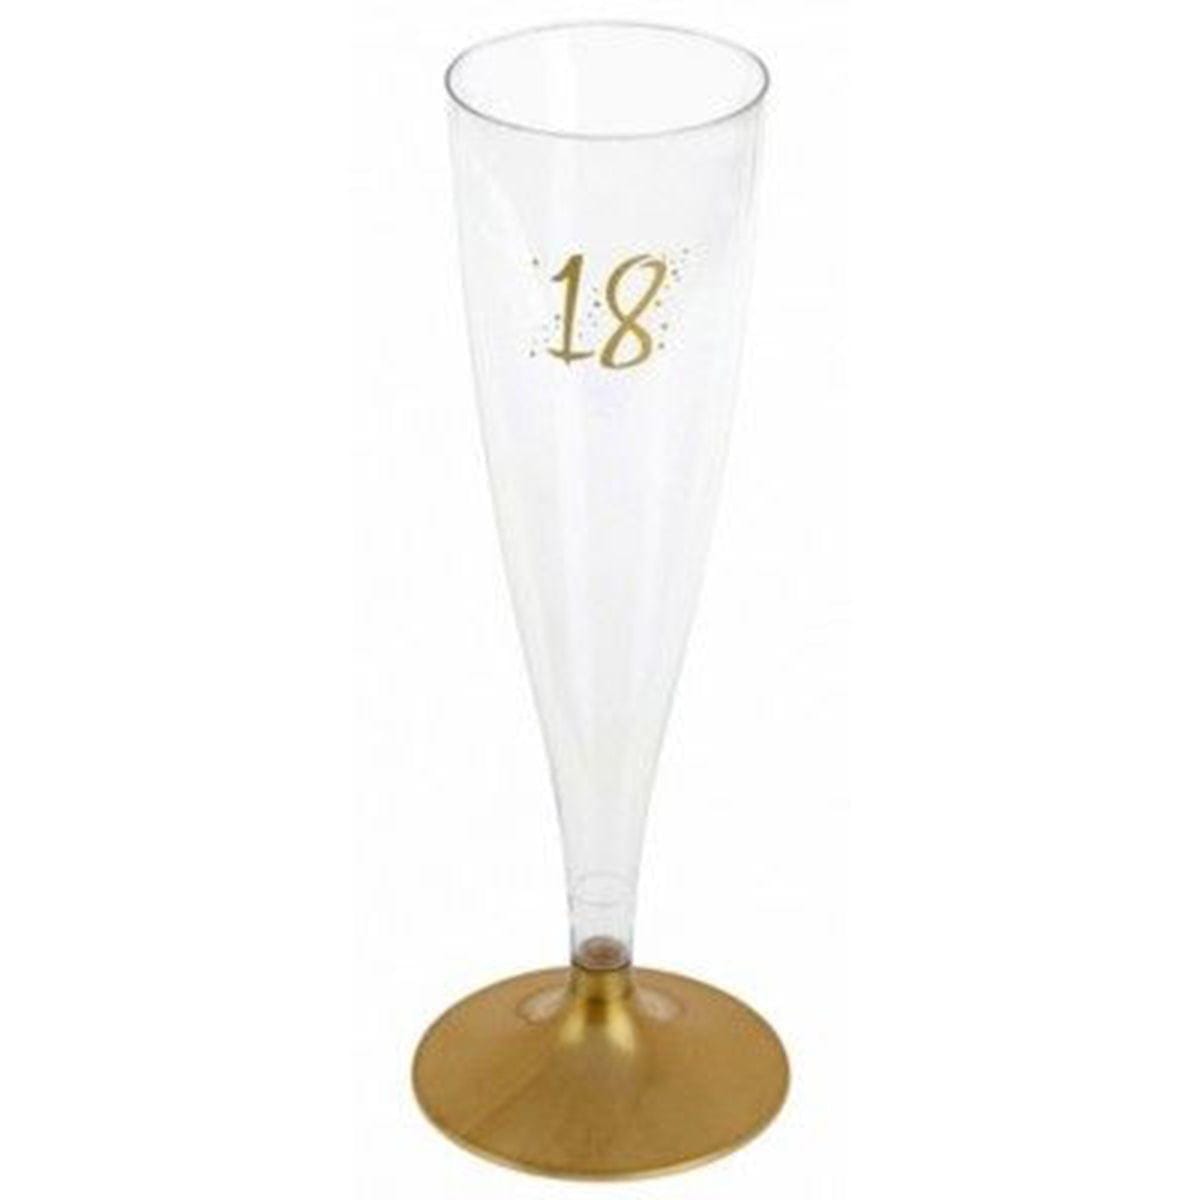 SANTEX Age Specific Birthday 18th Birthday Champagne Flute, Gold, 6 Count